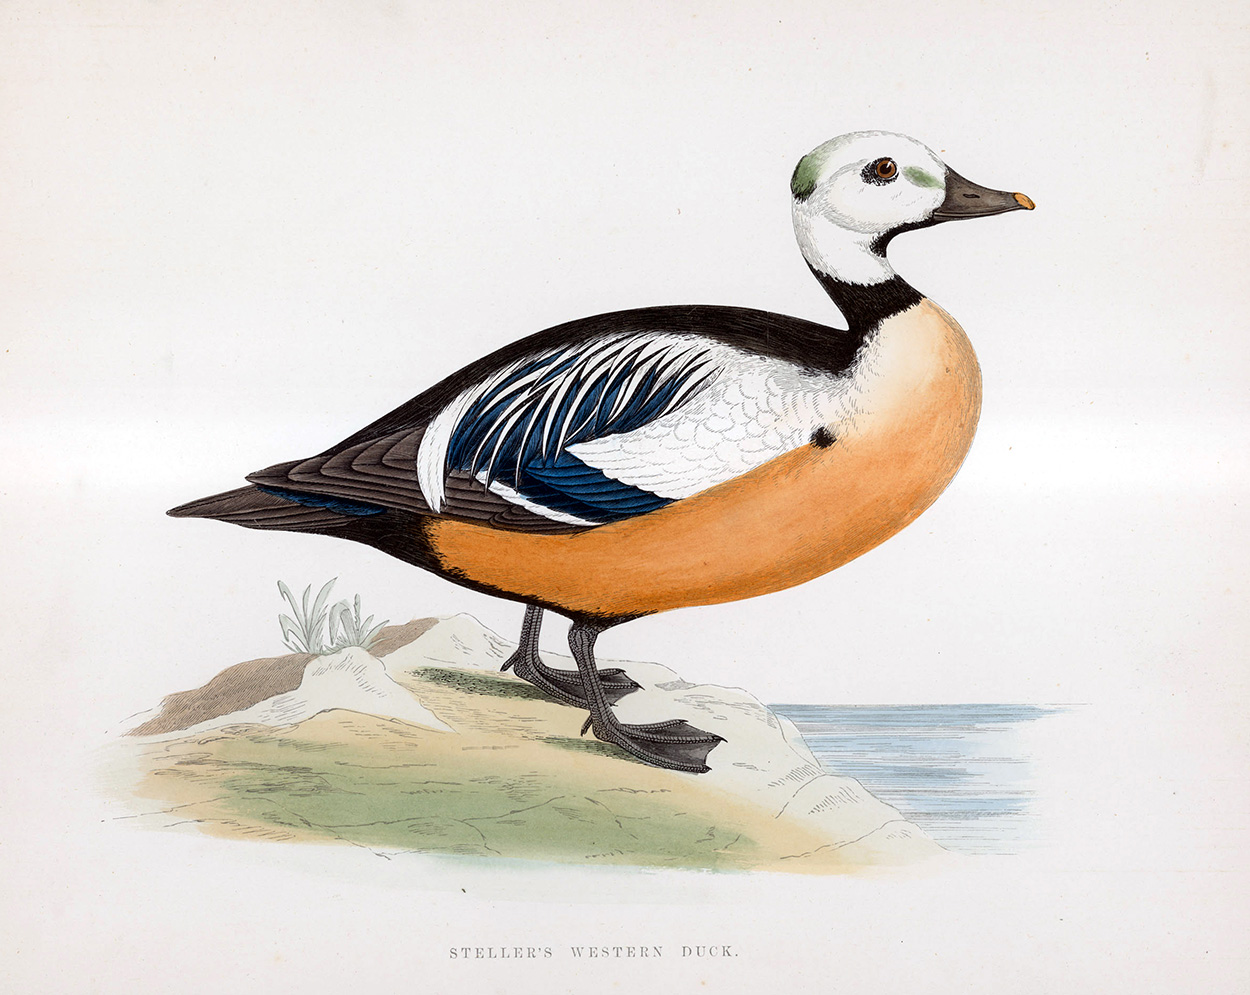 Steller's Western Duck - hand coloured lithograph 1891 (Print) art by Beverley R Morris Art at The Illustration Art Gallery